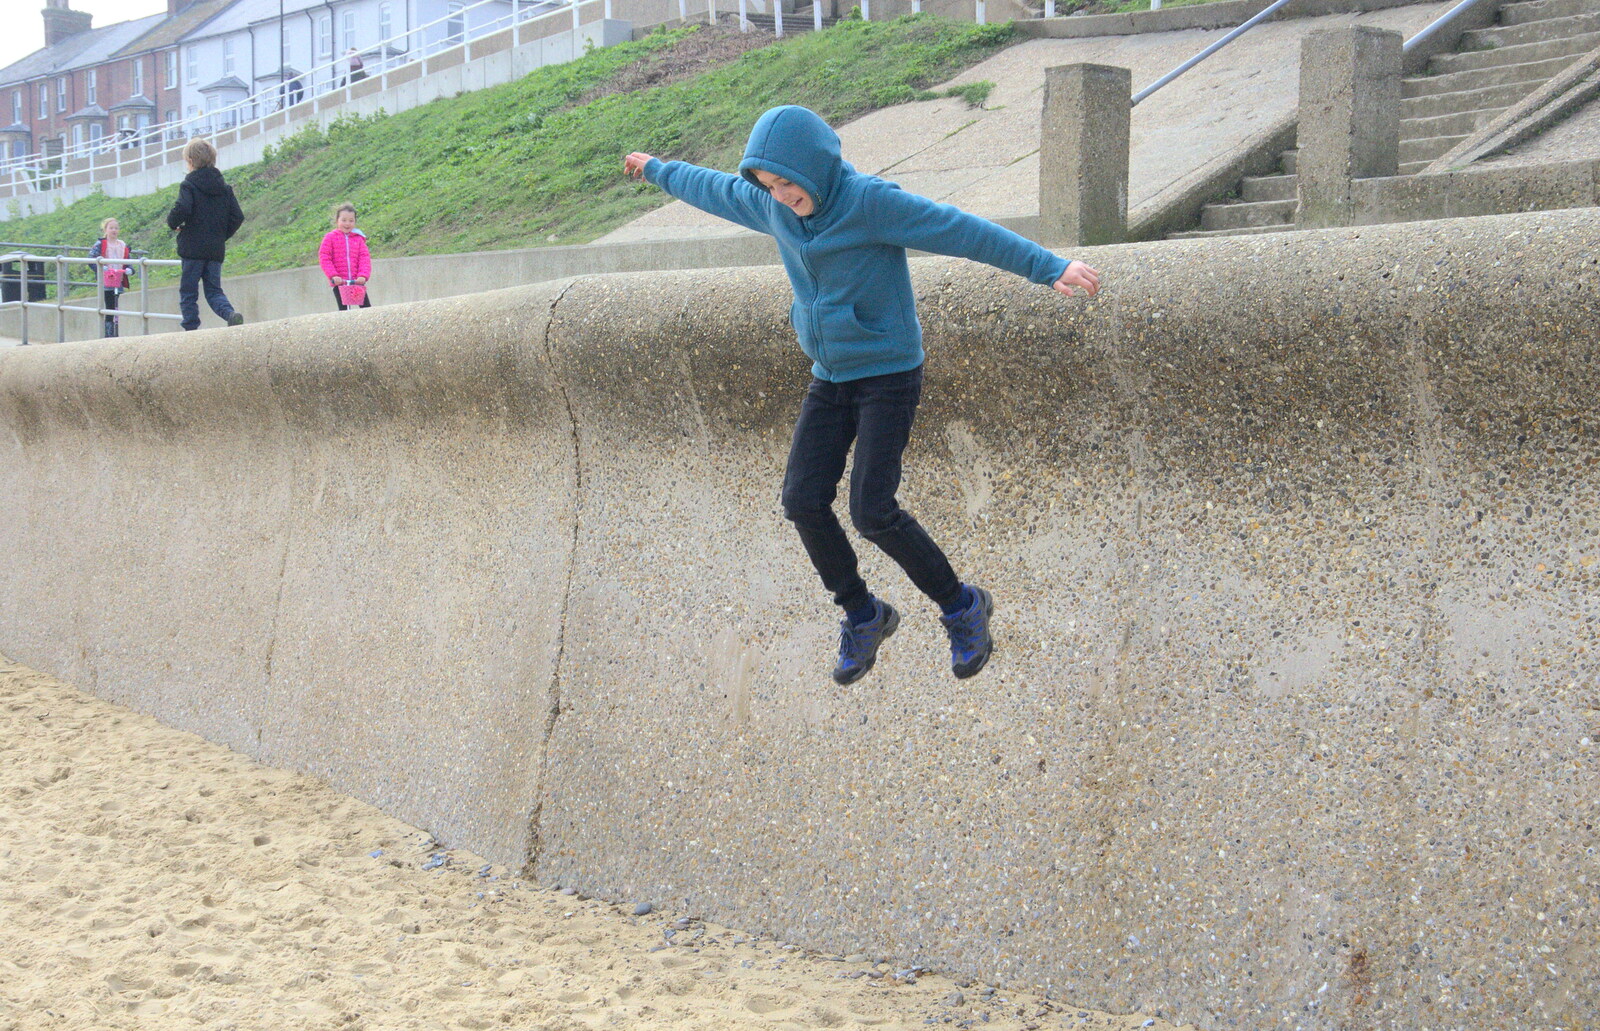 Fred leaps off the promenade from On The Beach, Southwold, Suffolk - 7th April 2019